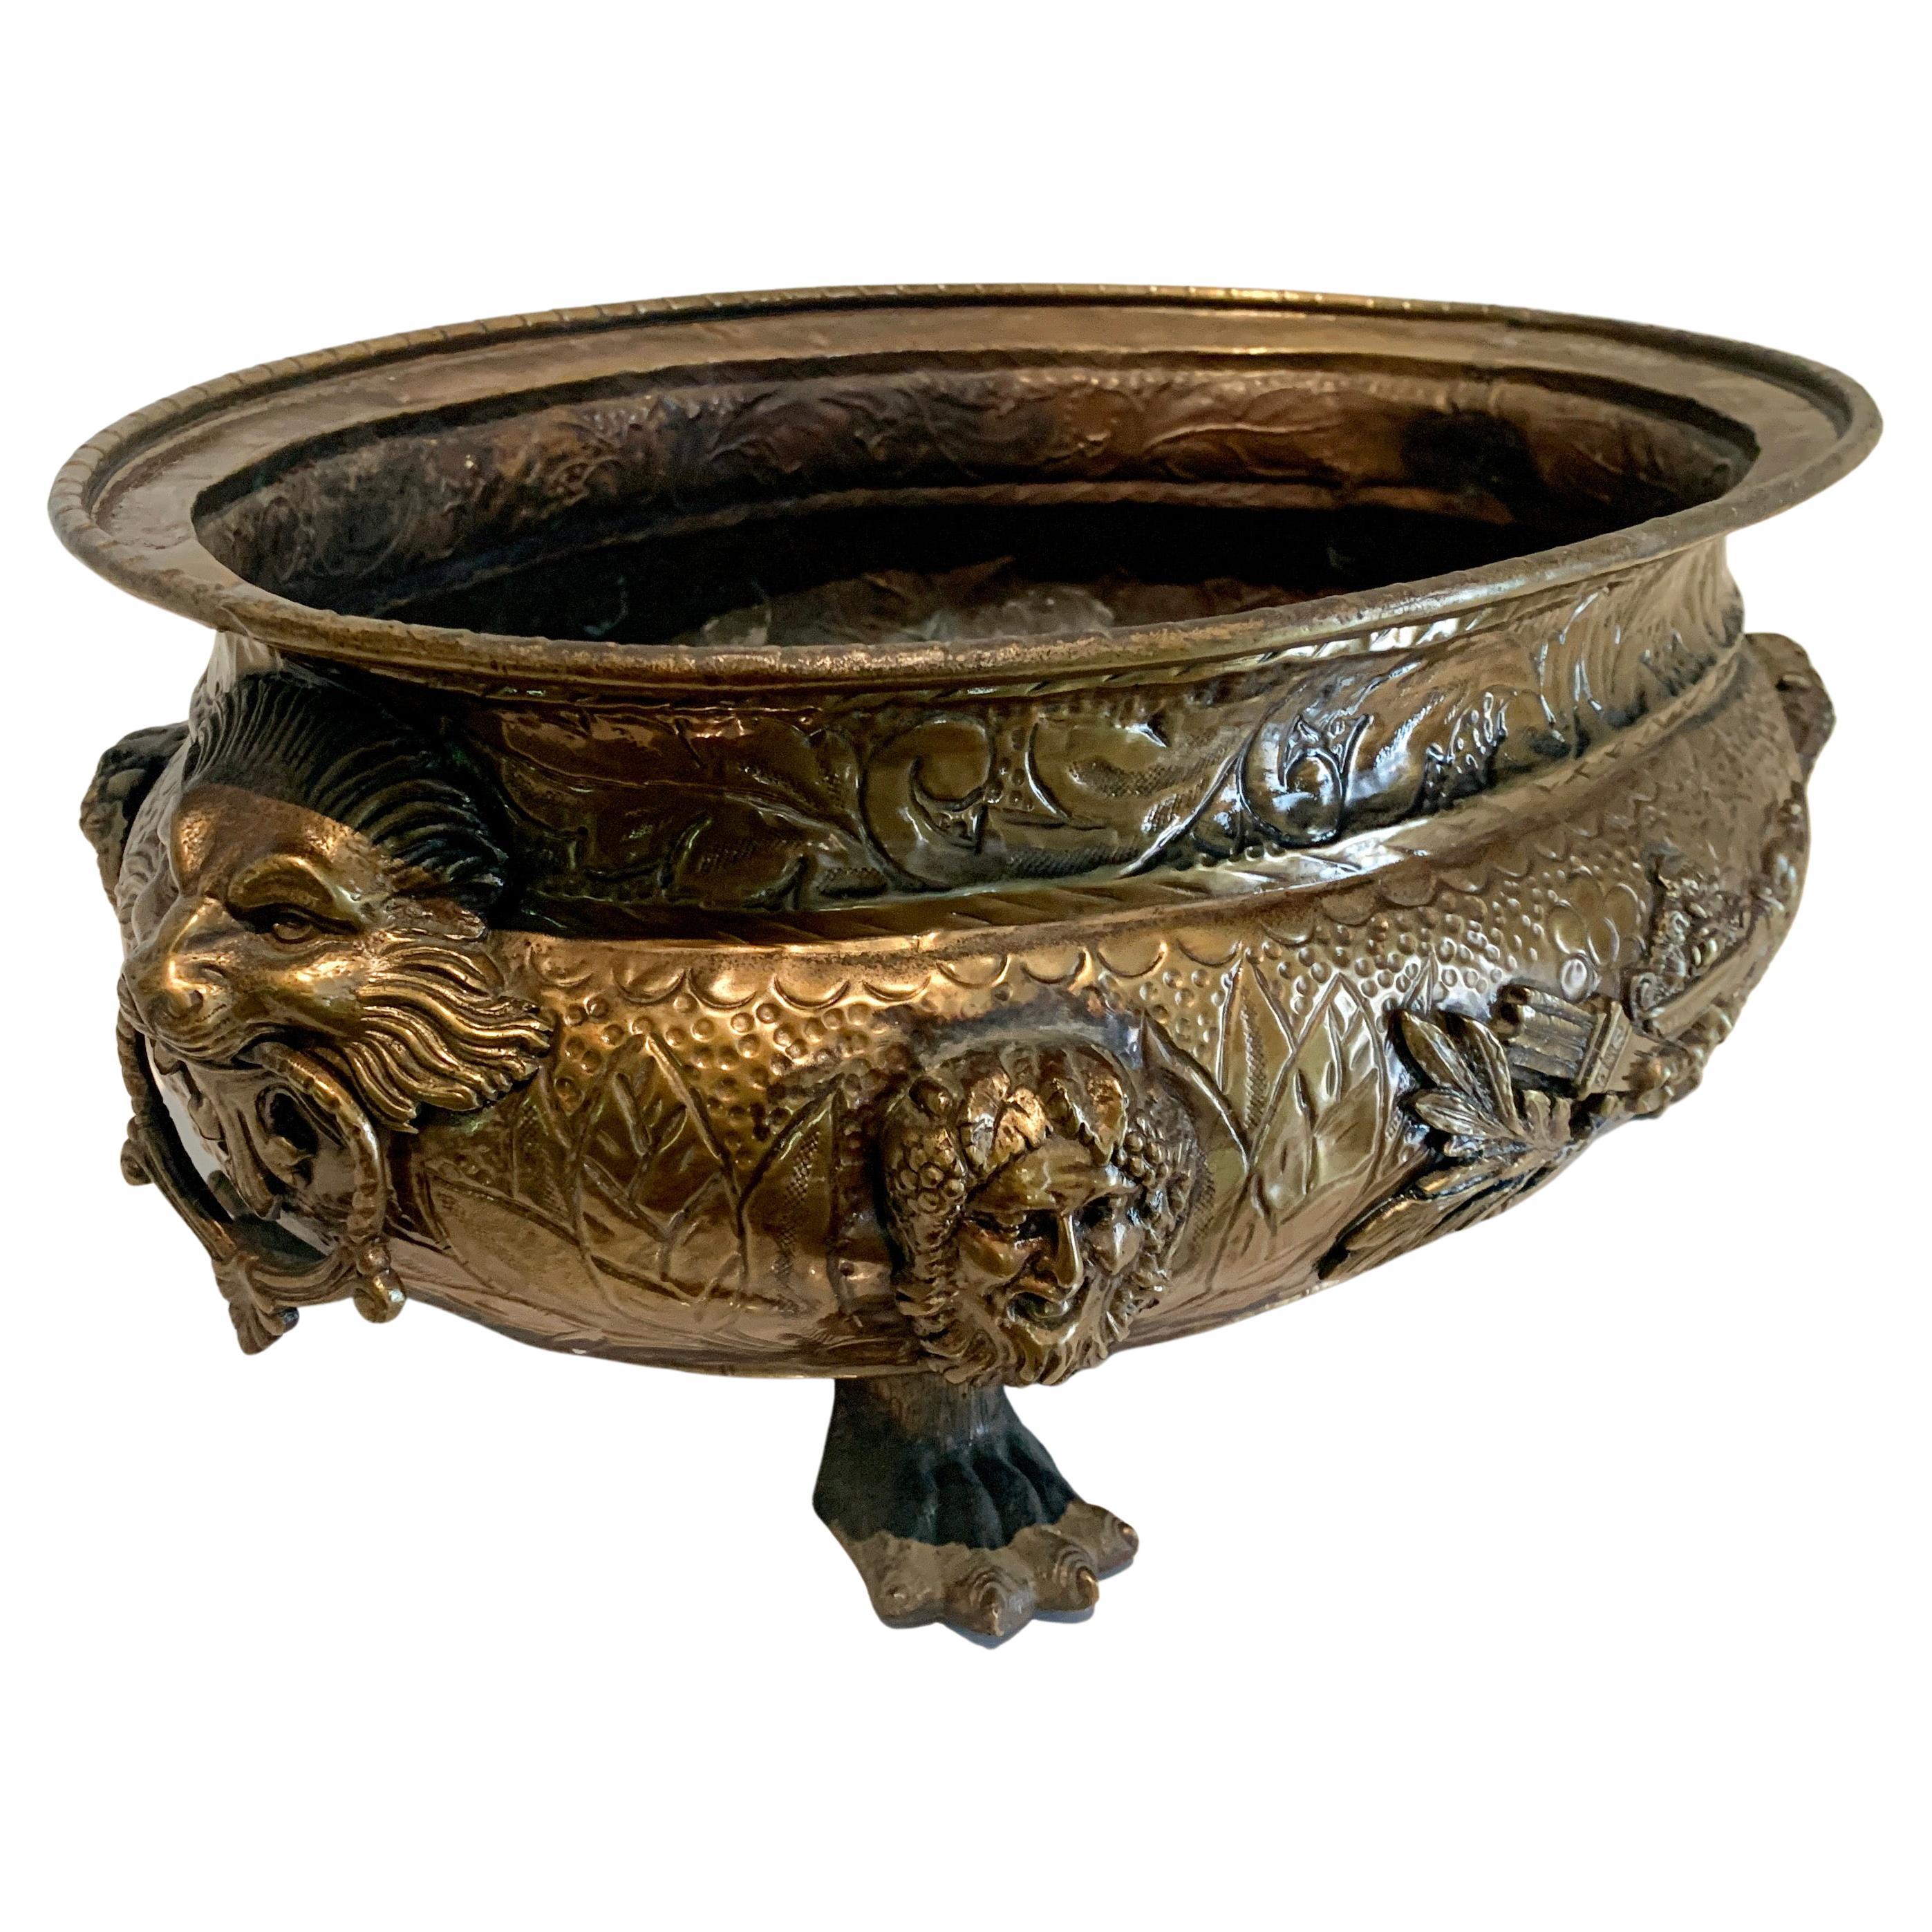 English Brass Jardiniere with Lions Heads, Rings and Paw Feet Details For Sale